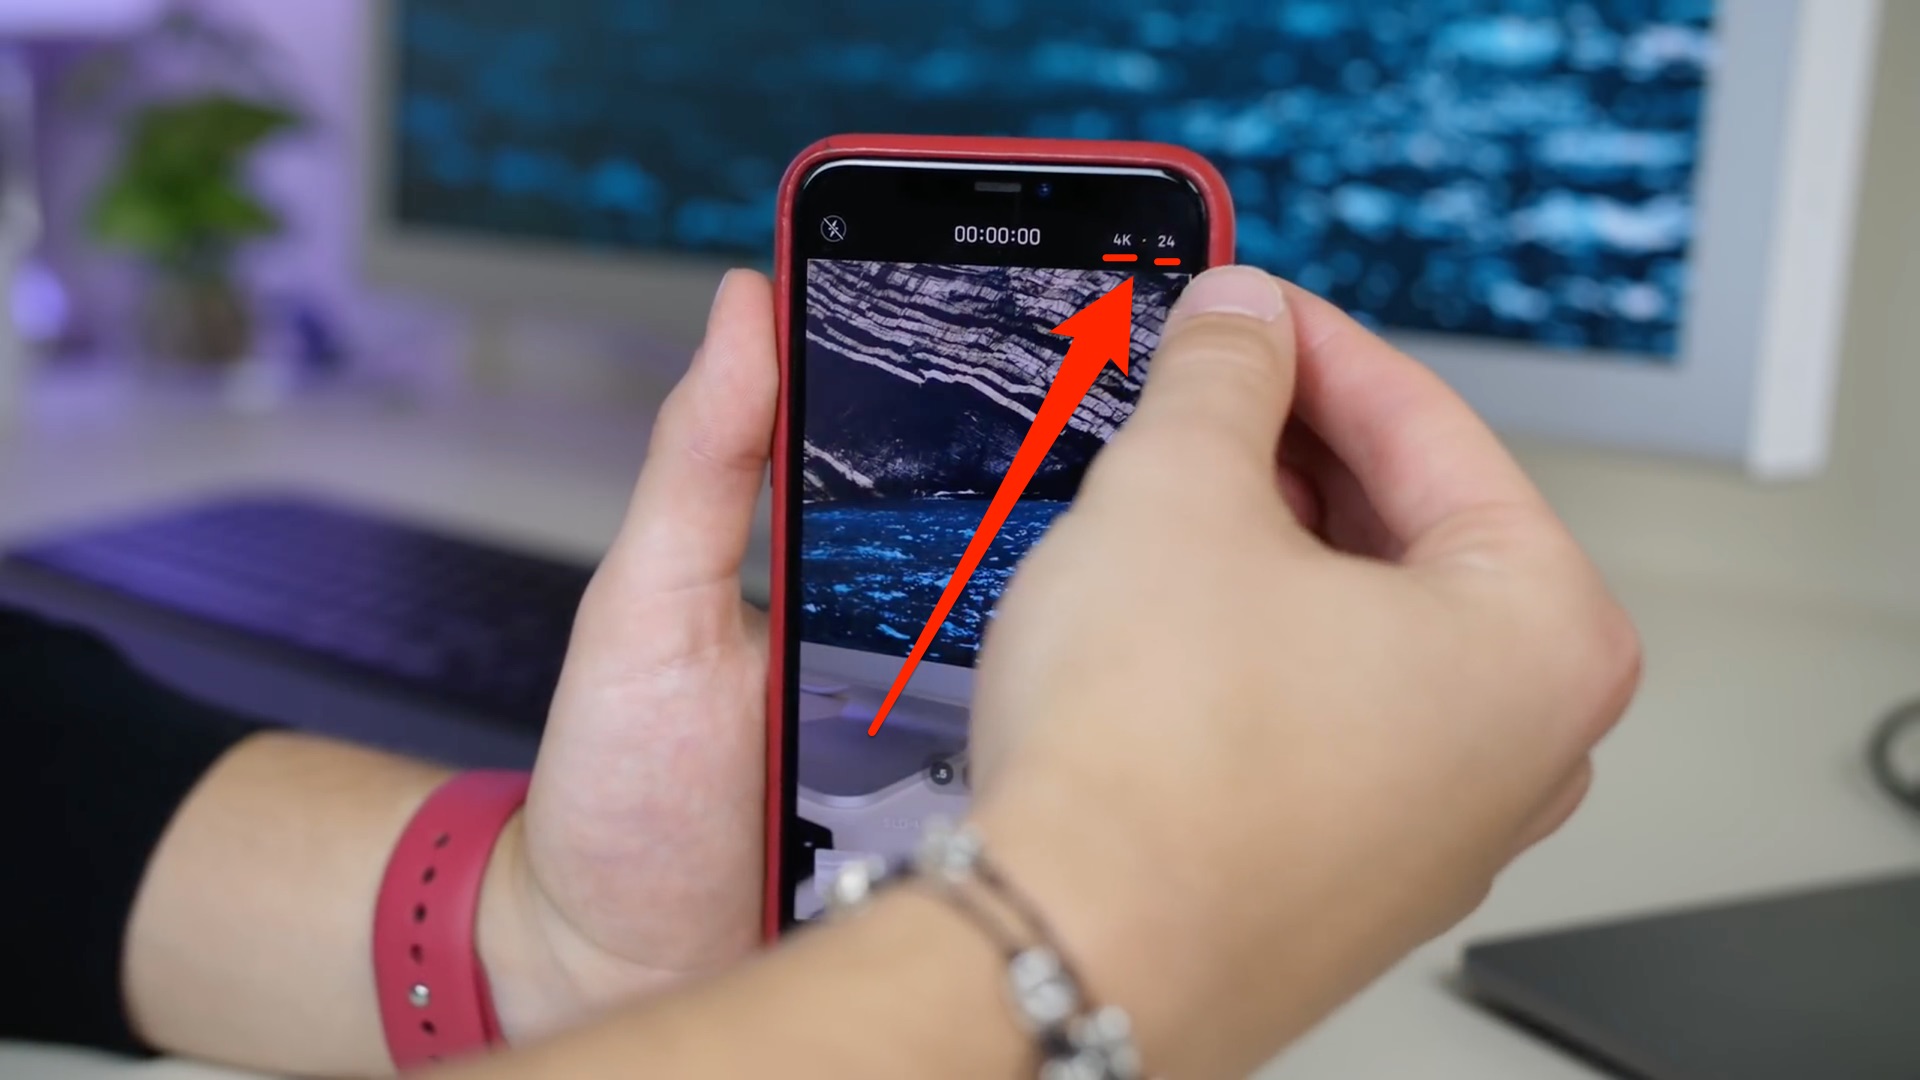 iOS 13.2 features tutorial: video resolution and frame rate in the Camera app